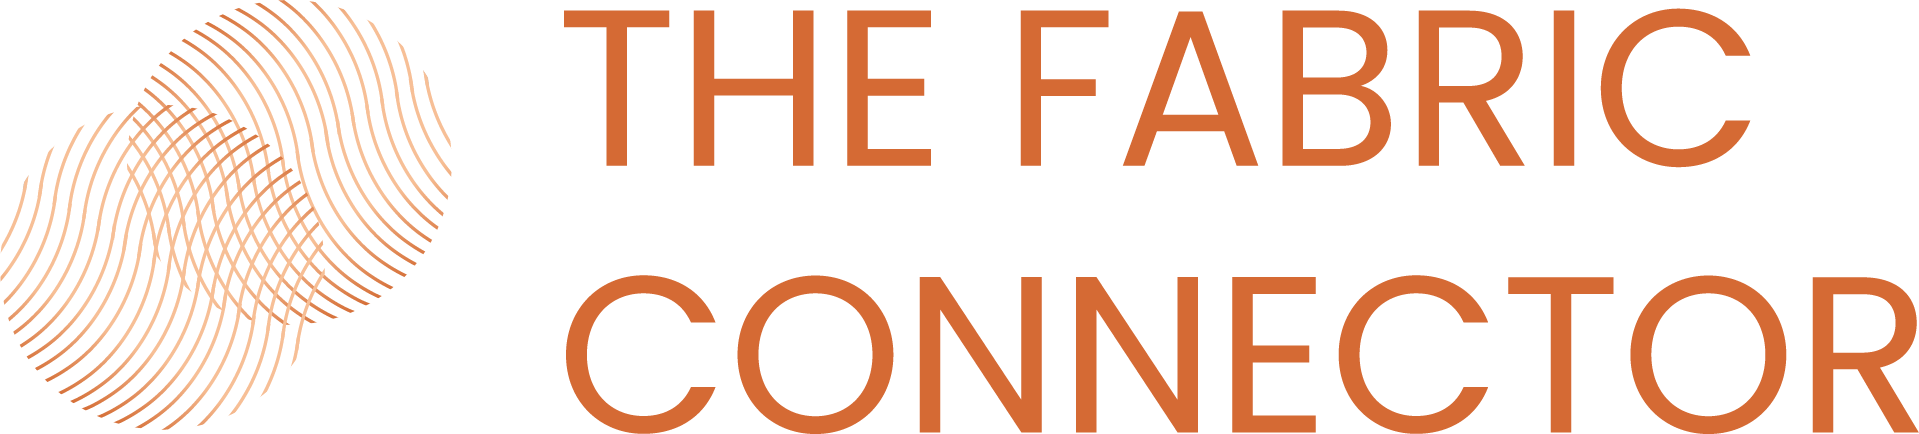 Organisations logo image for The Fabric Connector